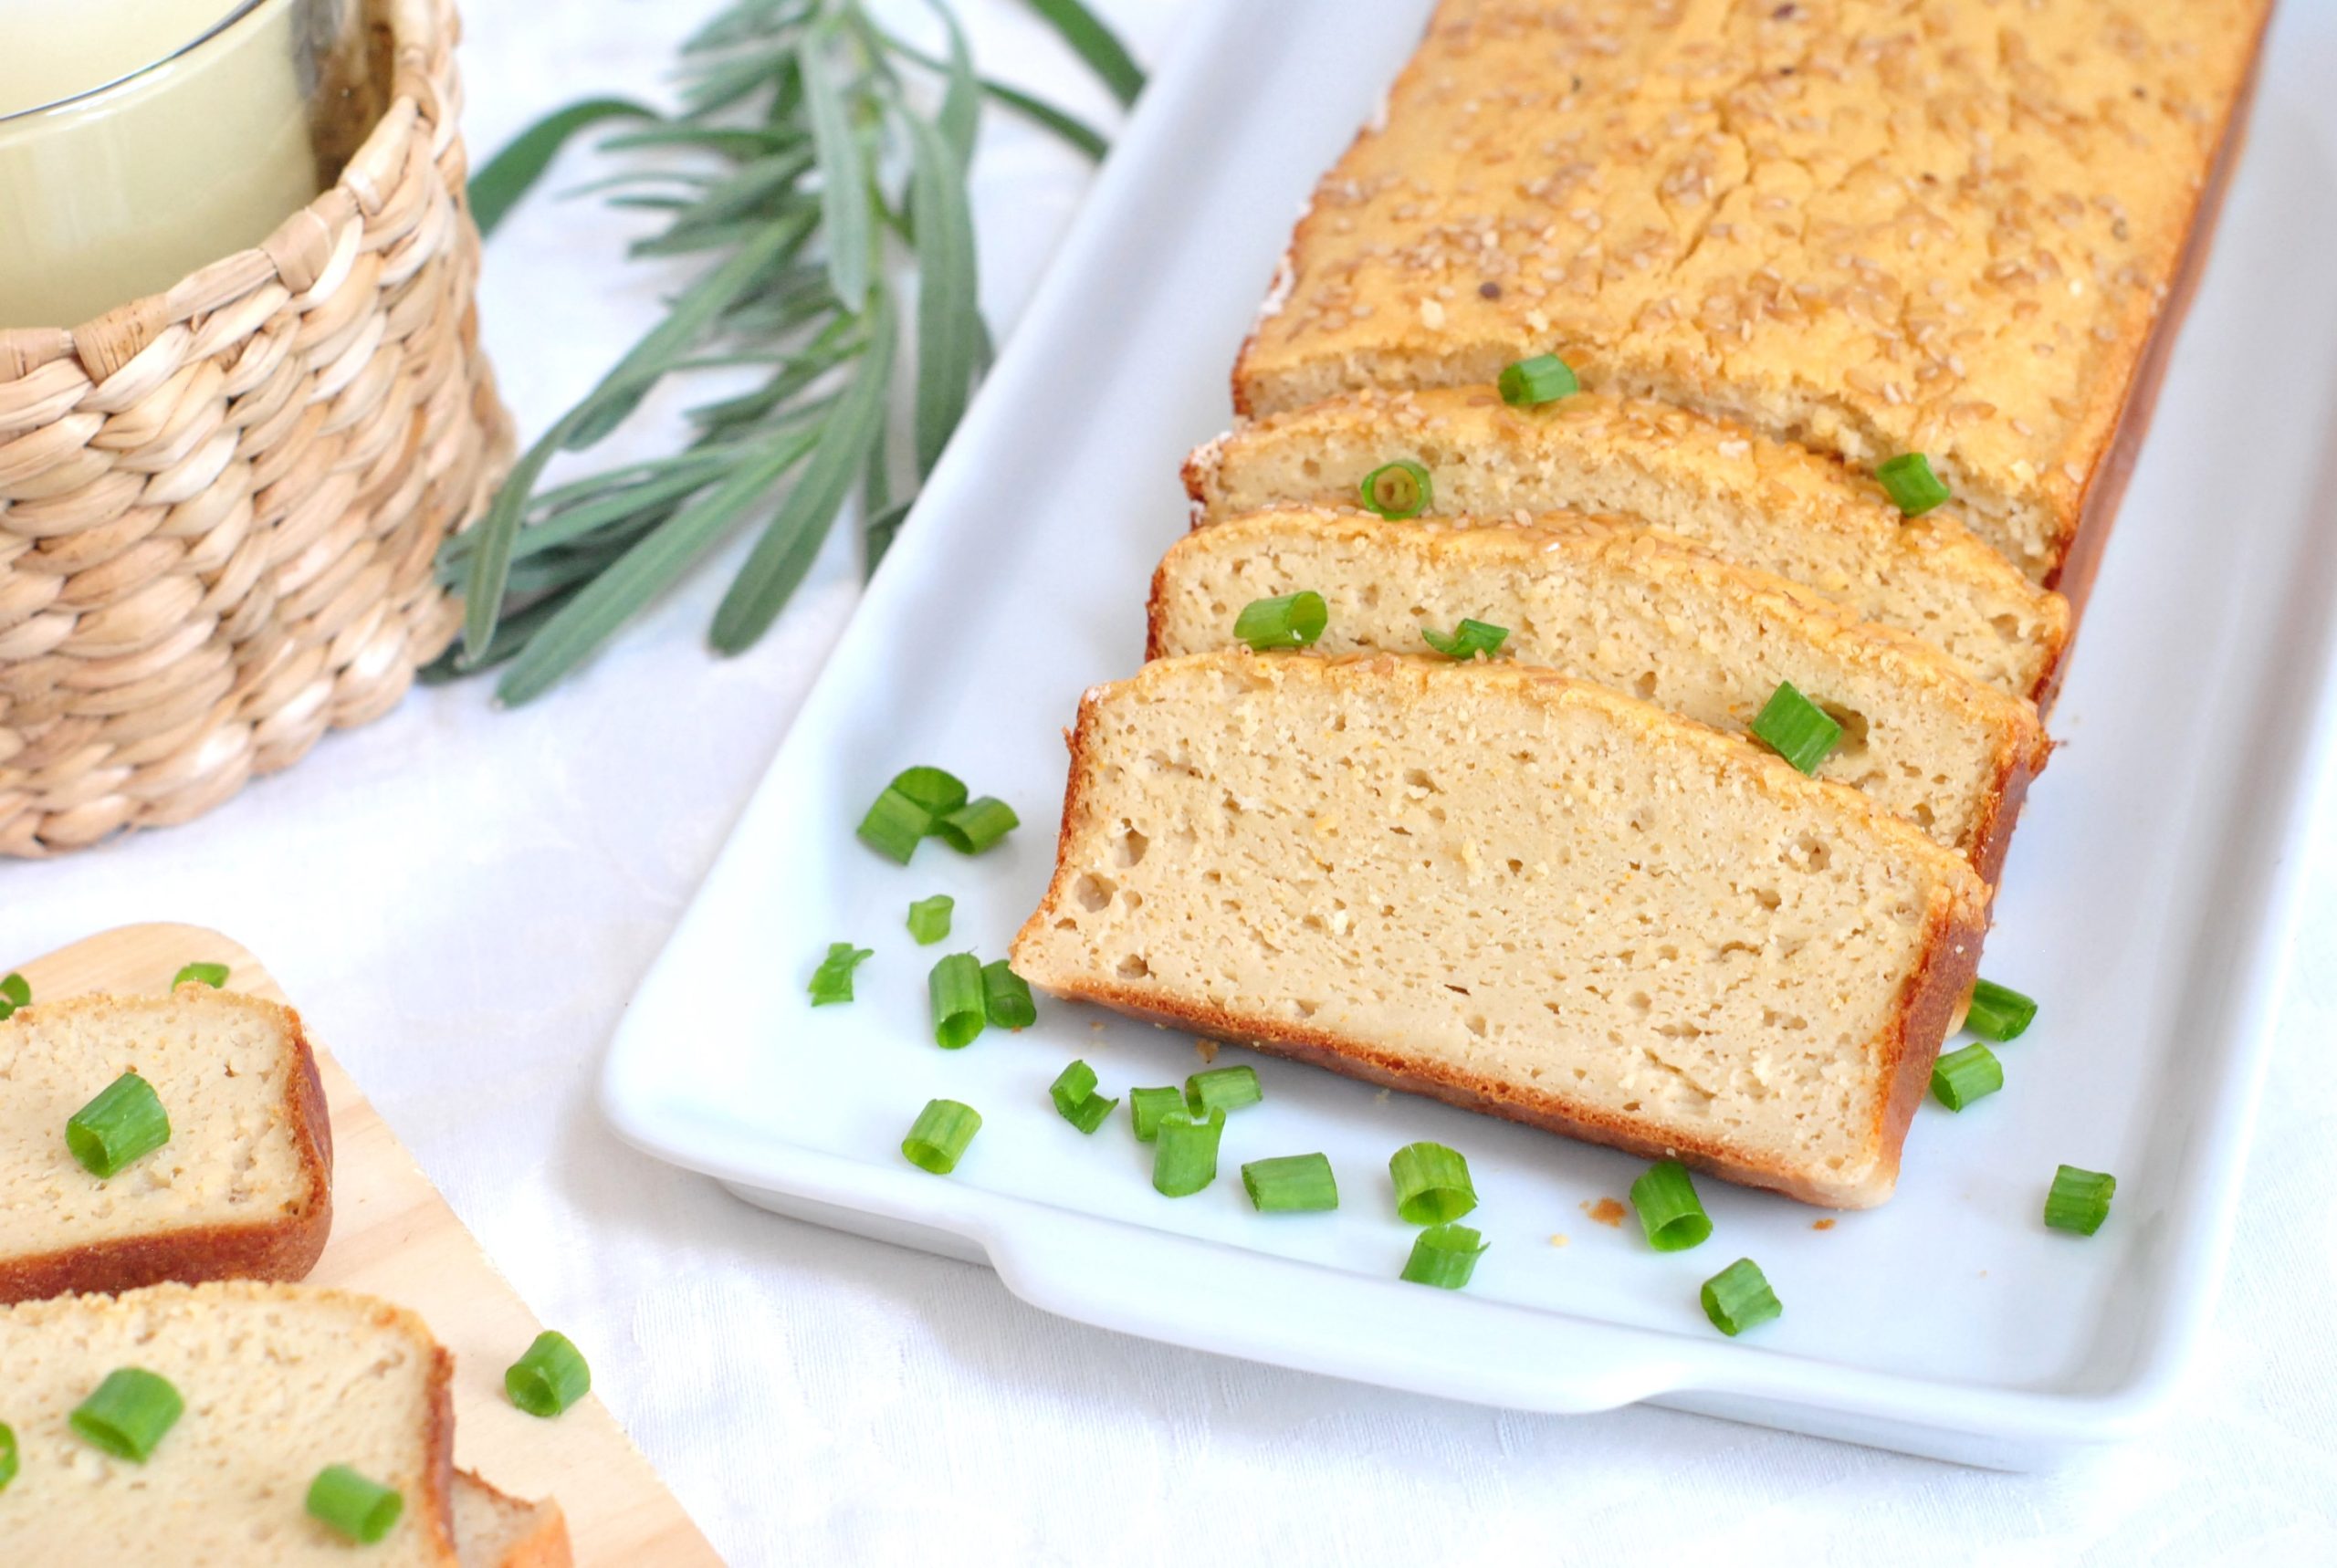 Low-calorie, yeast-free bread